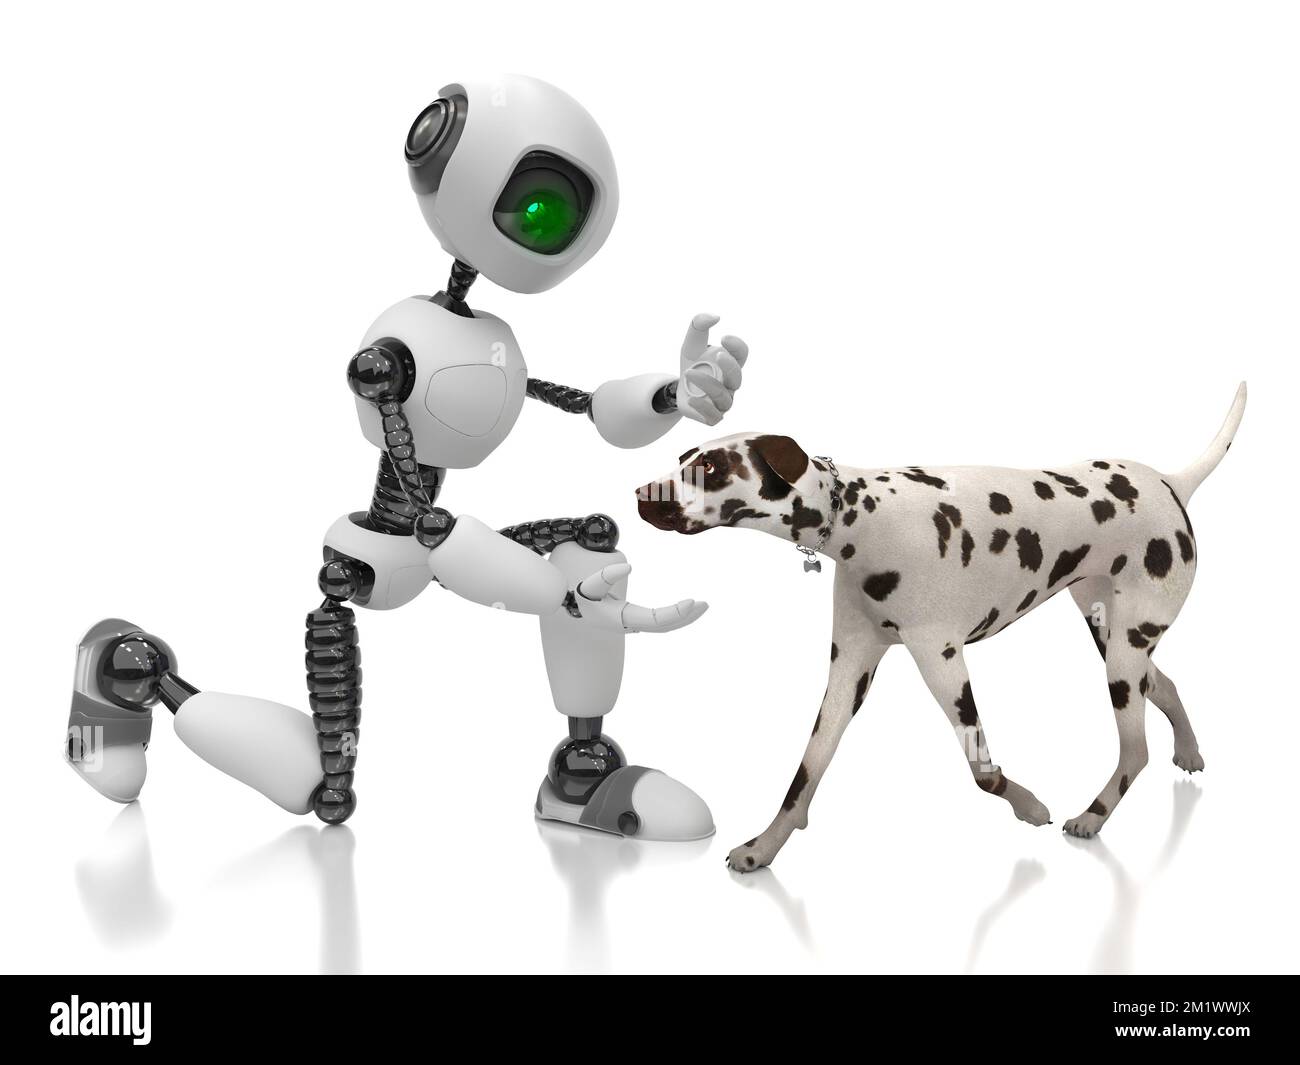 A humanoid robot plays with a Dalmatian dog. Future concept with smart robotics and artificial intelligence. 3D render on a white background. Stock Photo